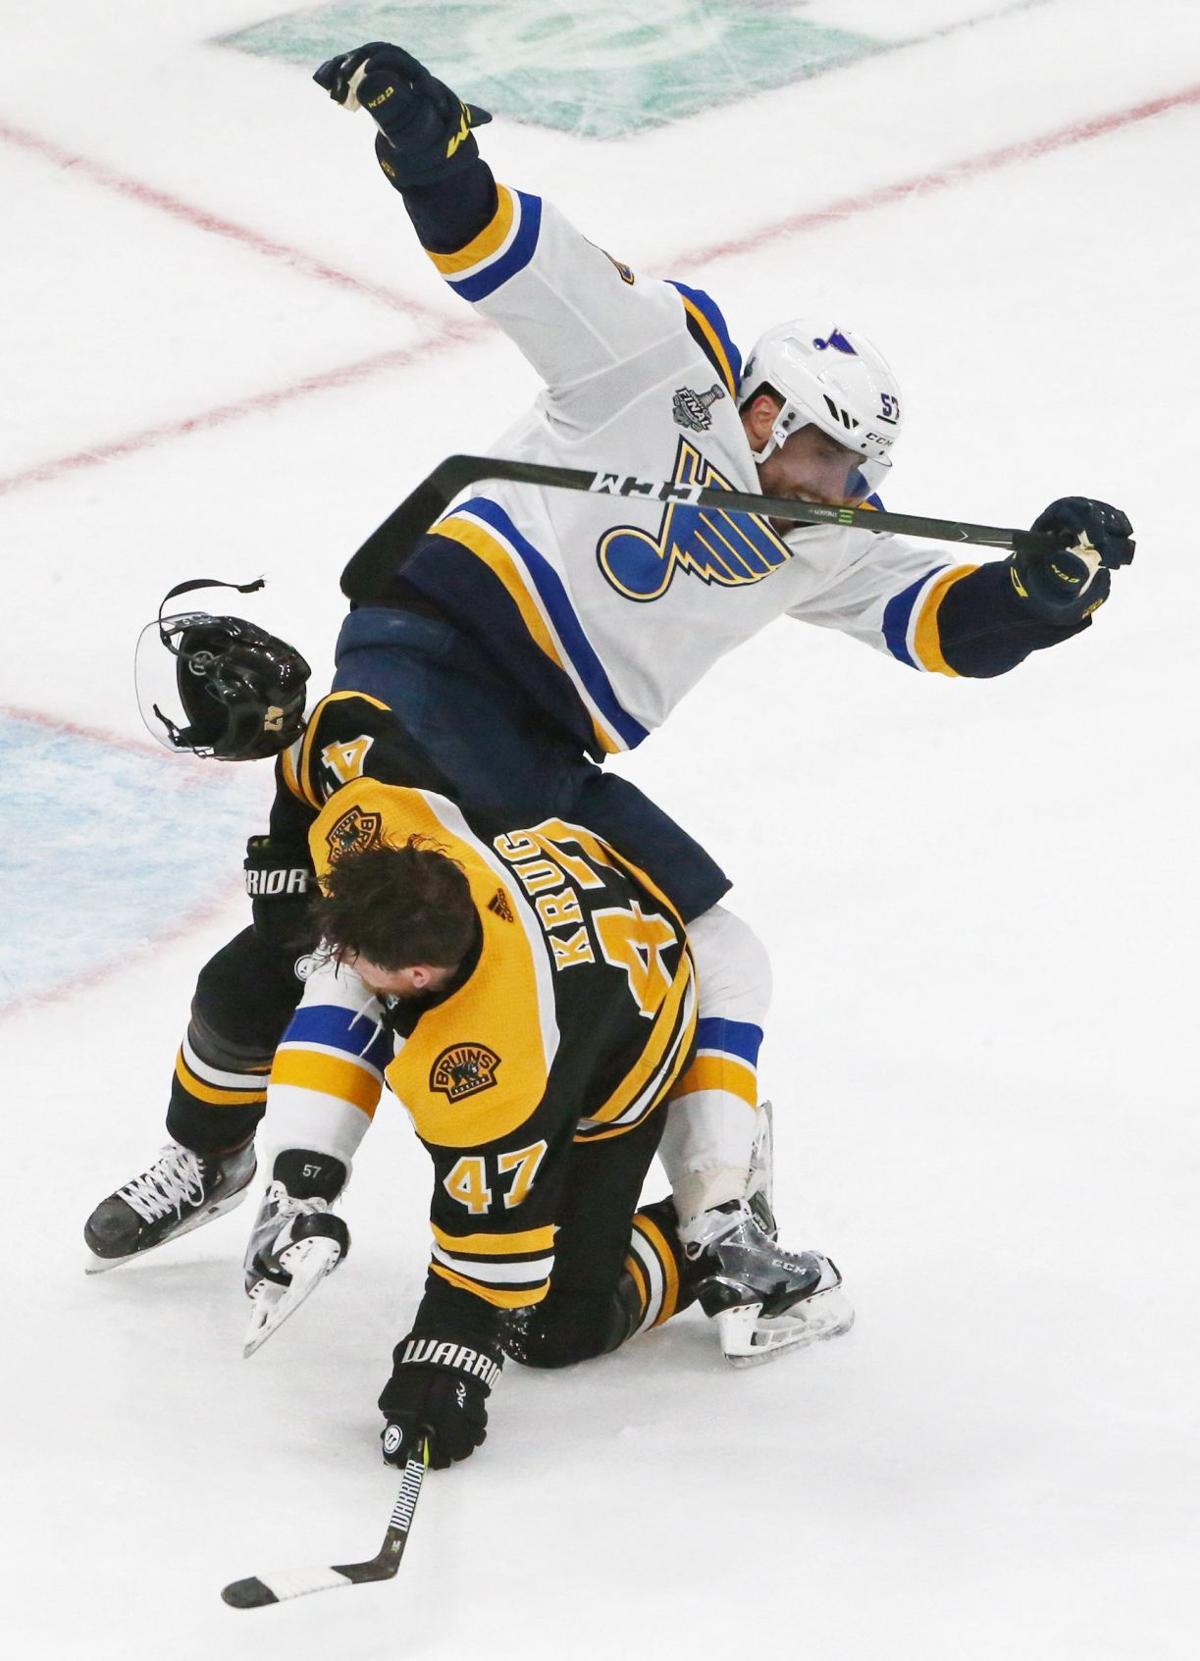 Off The Post: Bruins Fall to Blues in Overtime, Tuukka Rask Interview